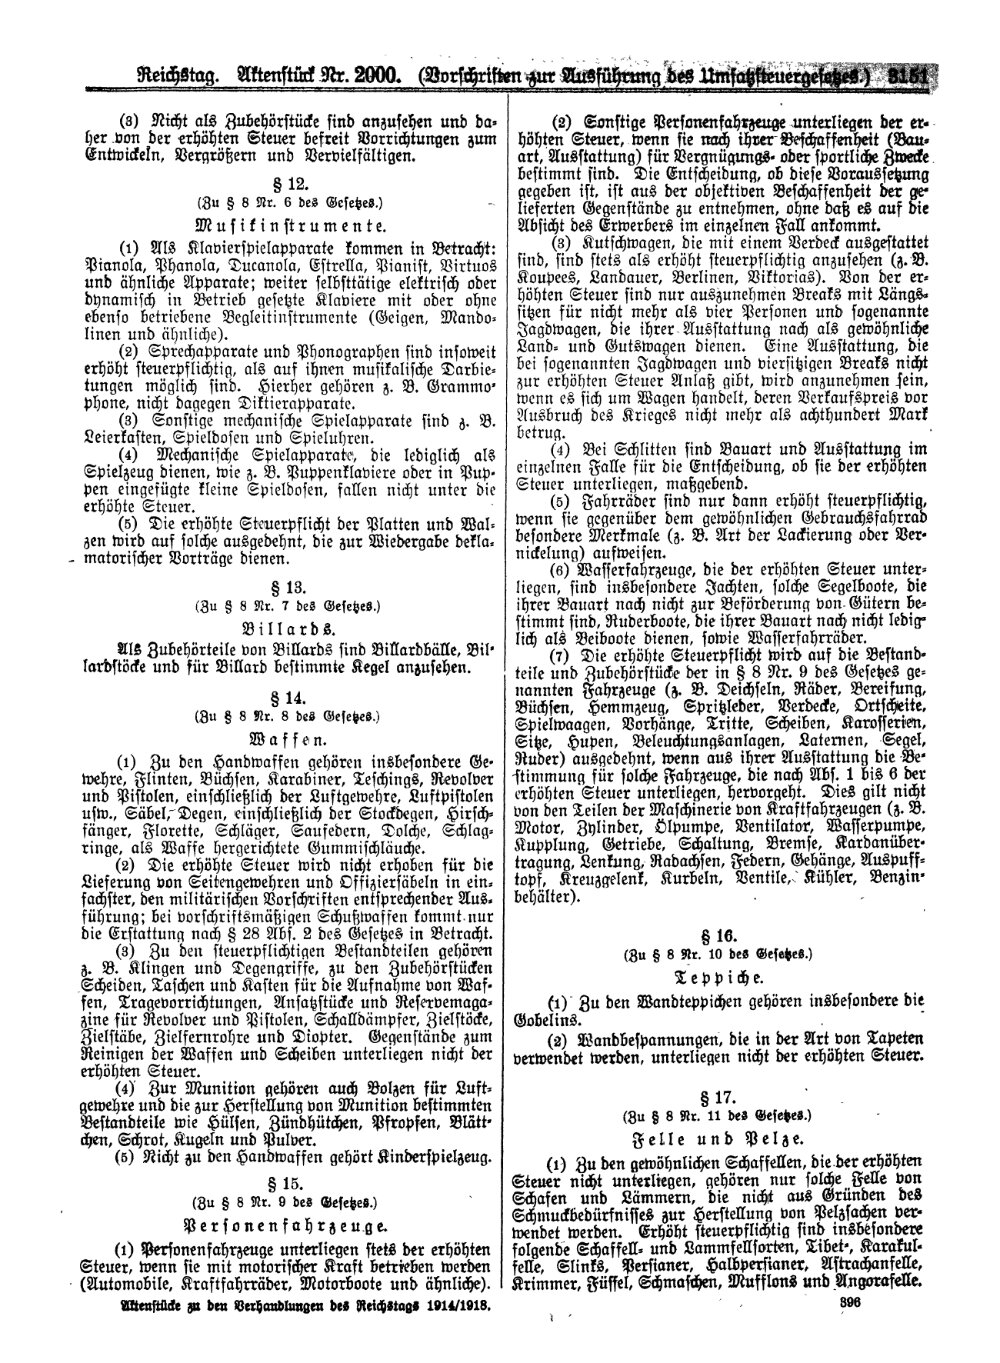 Scan of page 3151